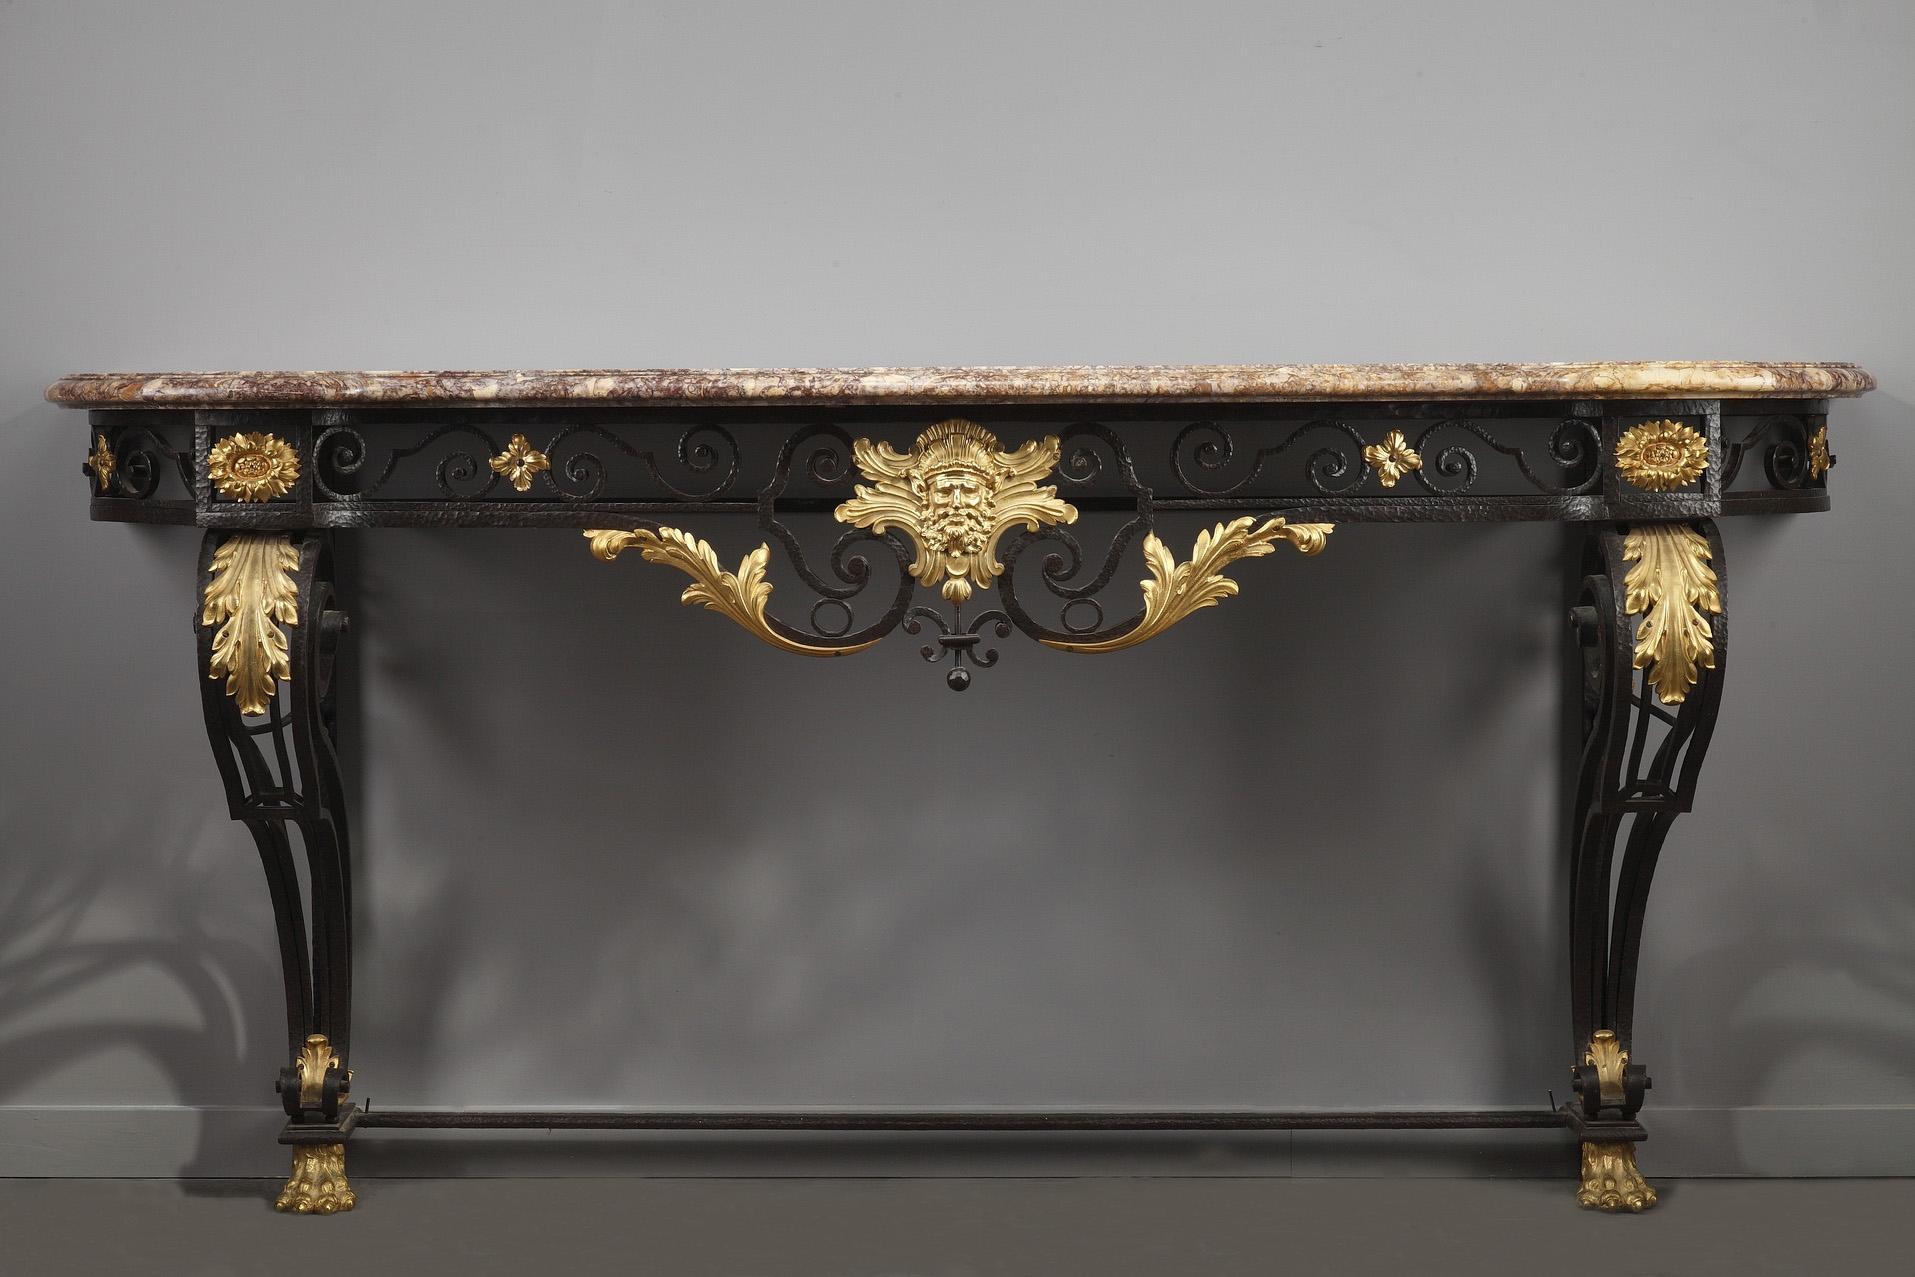 Fashioned in the Louis XV style, this large French console table is crafted of hammered, black and gilt lacquered wrought iron. Crafted with meticulous attention to detail, the openwork belt is decorated with scrolls, flowers and bearded mask